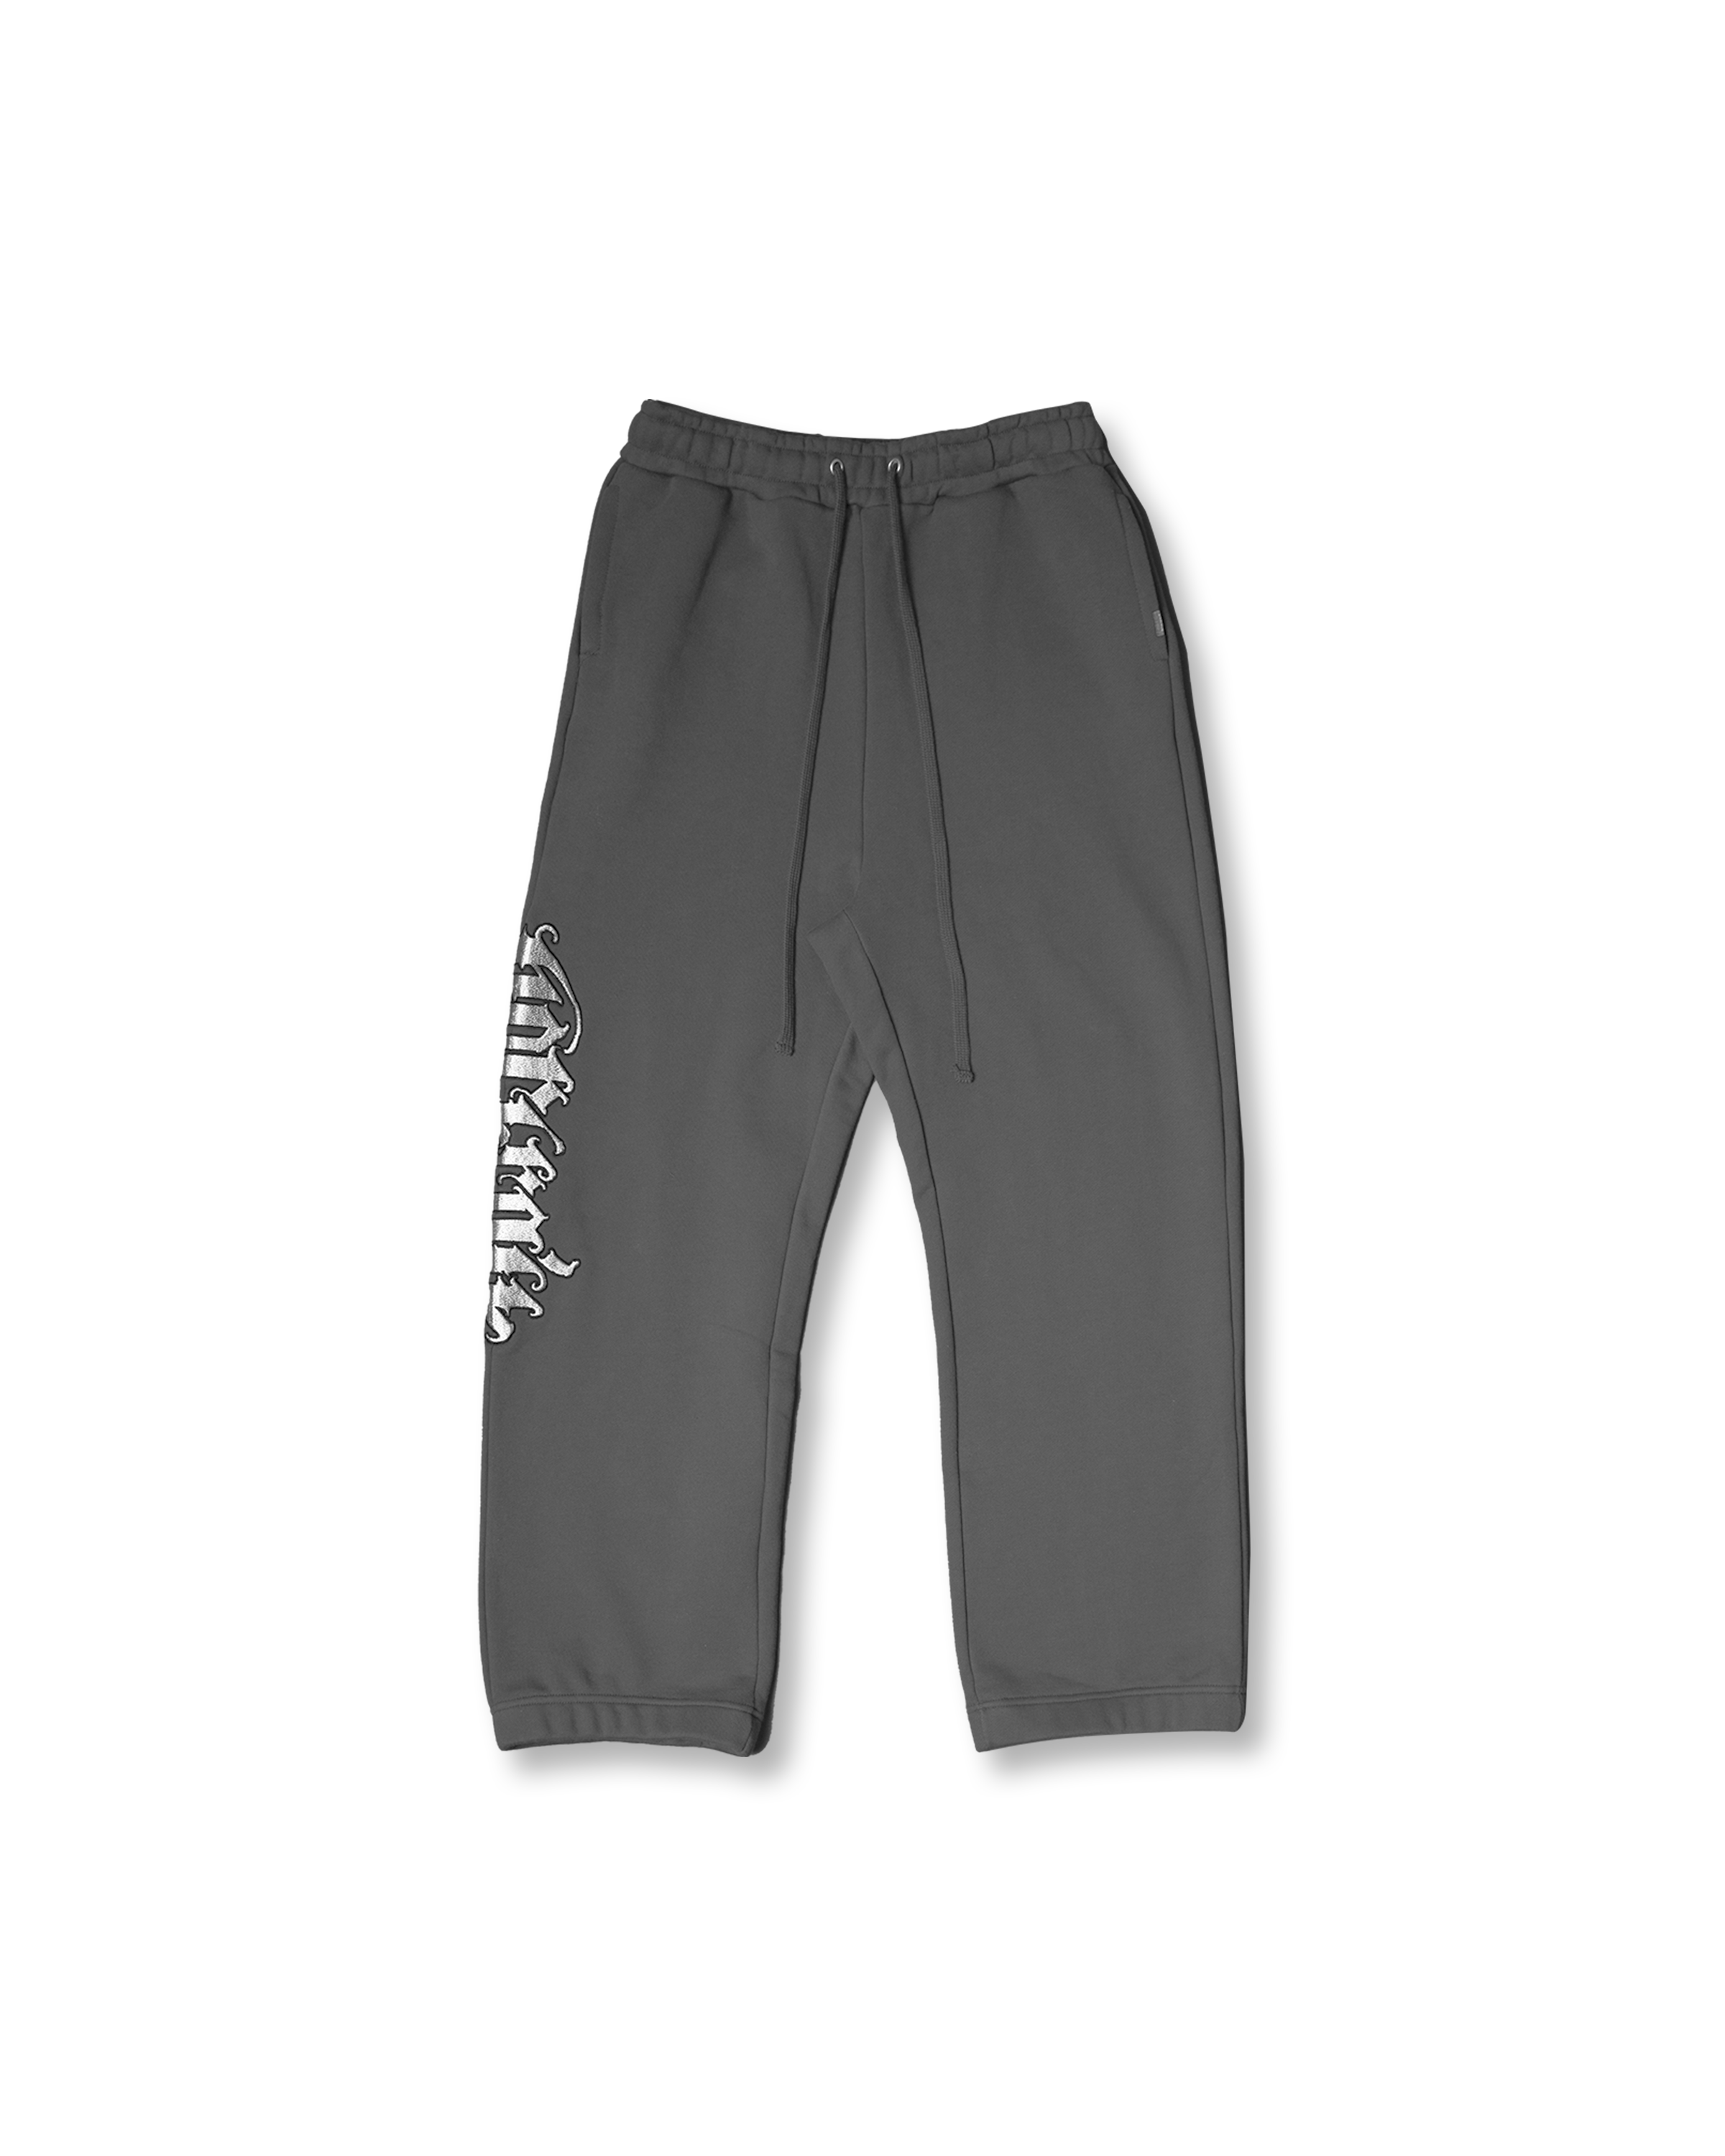 [M SOLD OUT] Chicano Charcoal Sweat Pants